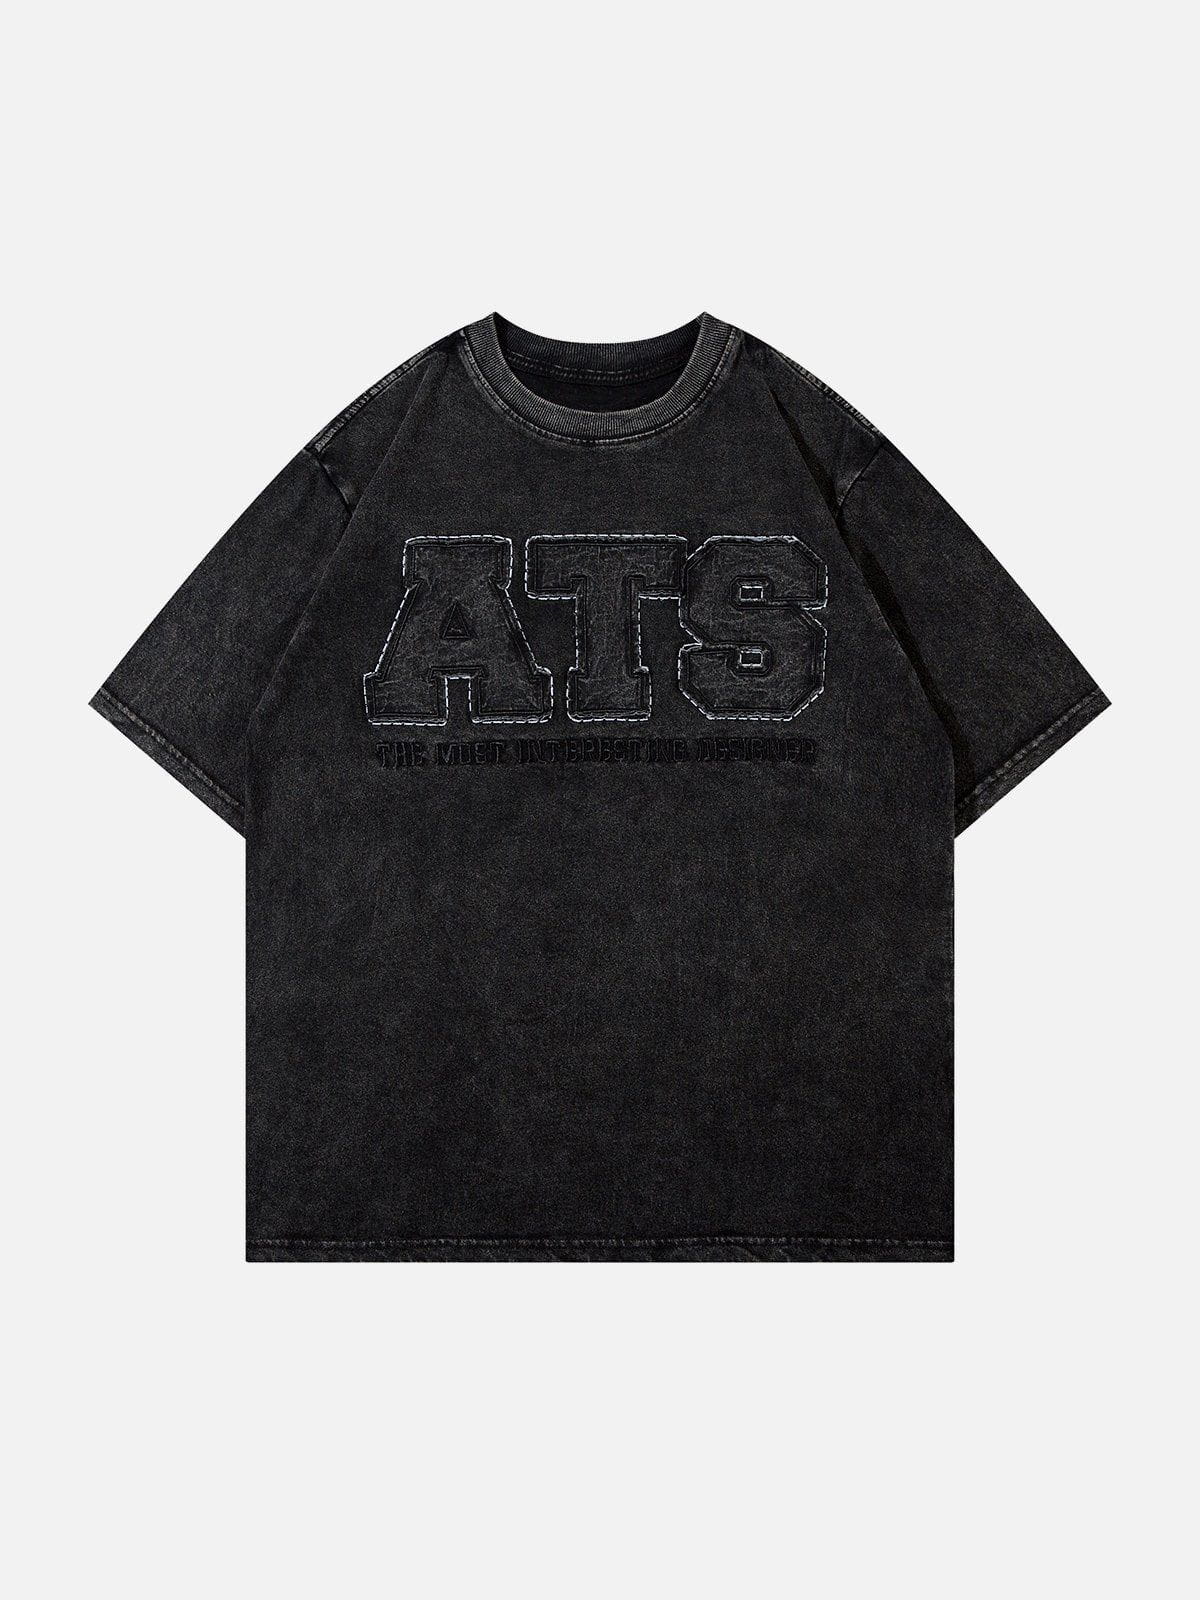 Sneakerland™ - ATS Letter Patchwork Tee